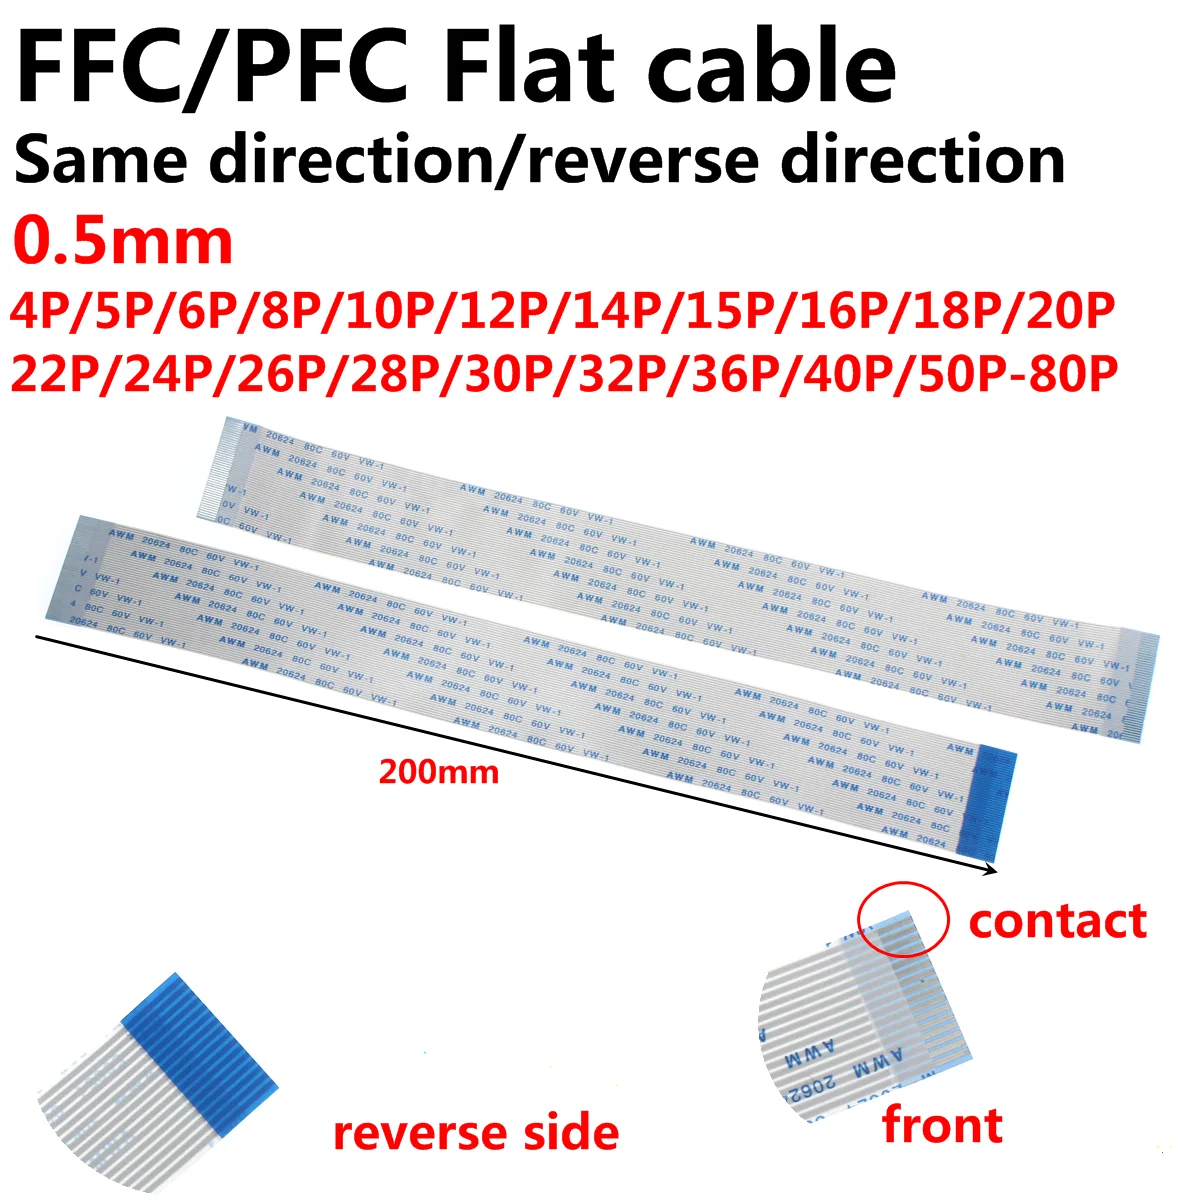 20Pcs FPC Flexible Flat Cable FFC 0.5MM 200MM 20cm A B type interface 4P 5P 6P 8P 10P 12P 14P 16P 18P 20P 22P 24P-40P 15cm 12pin 0 5pitch 40mm 800mm a type flexible flat cable ffc awm 20624 rohs for ttl lcd dvd computer